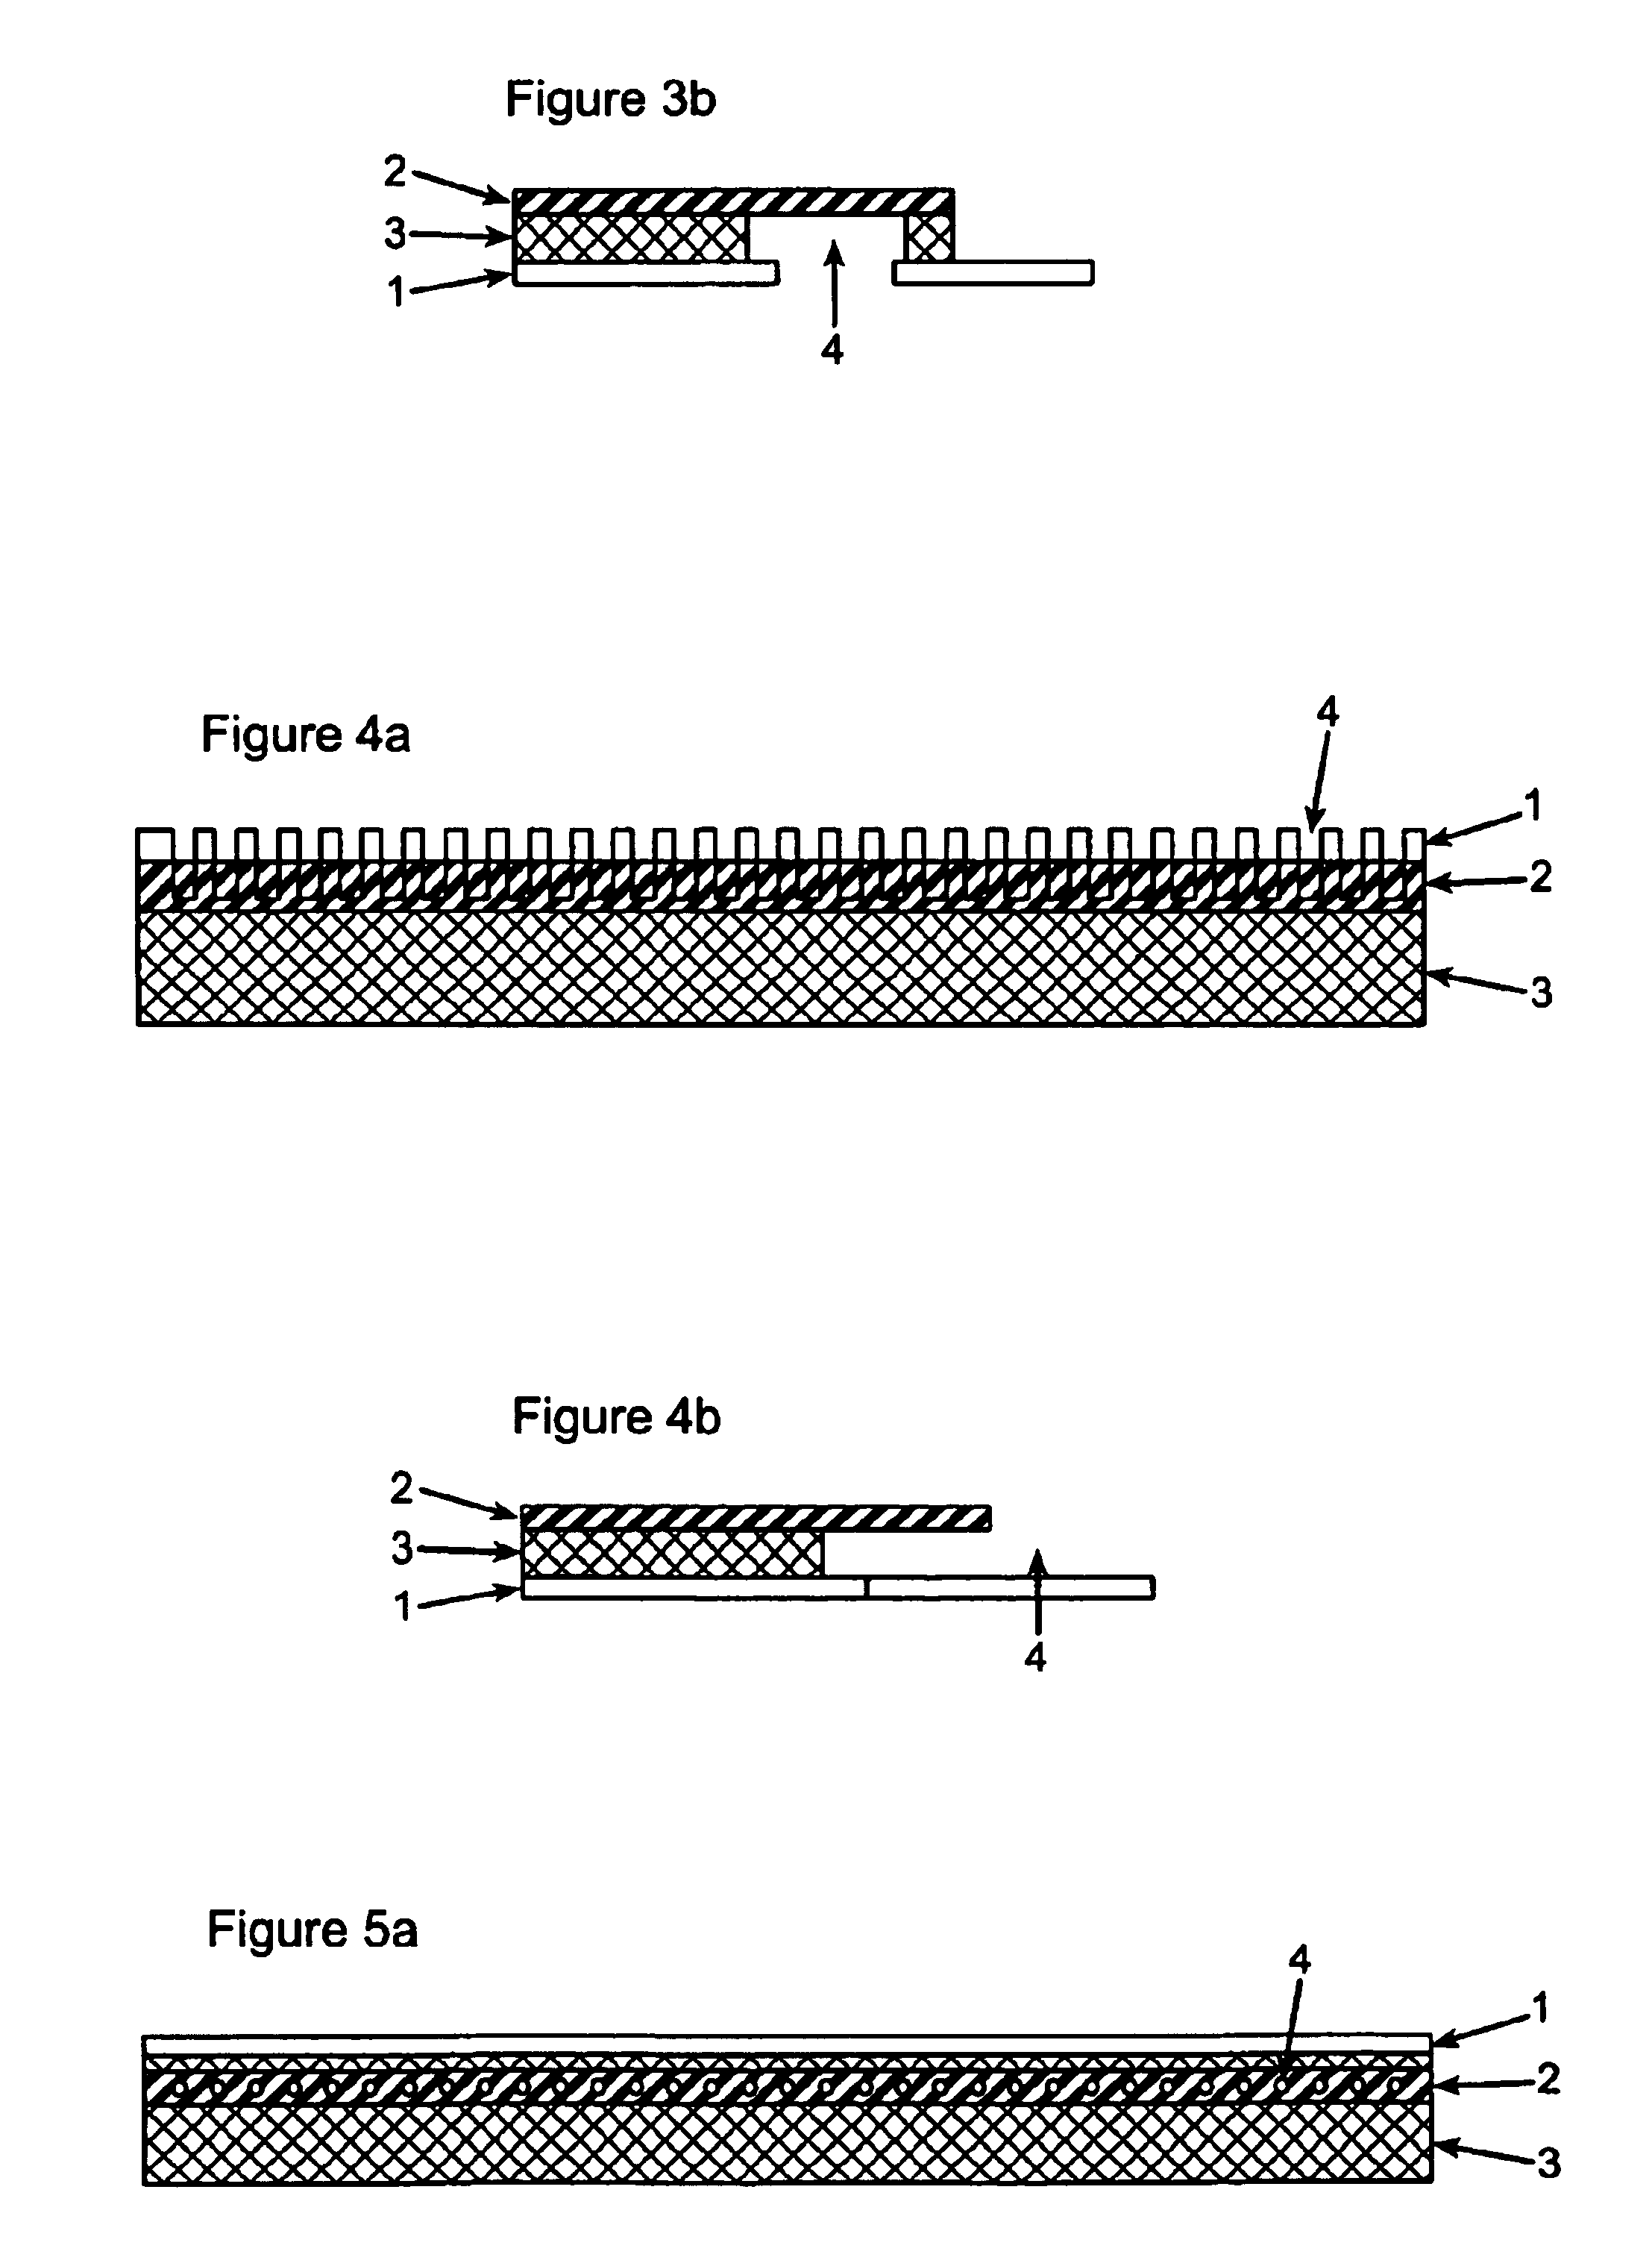 Method of forming an electrical connection between an electrochemical cell and a meter